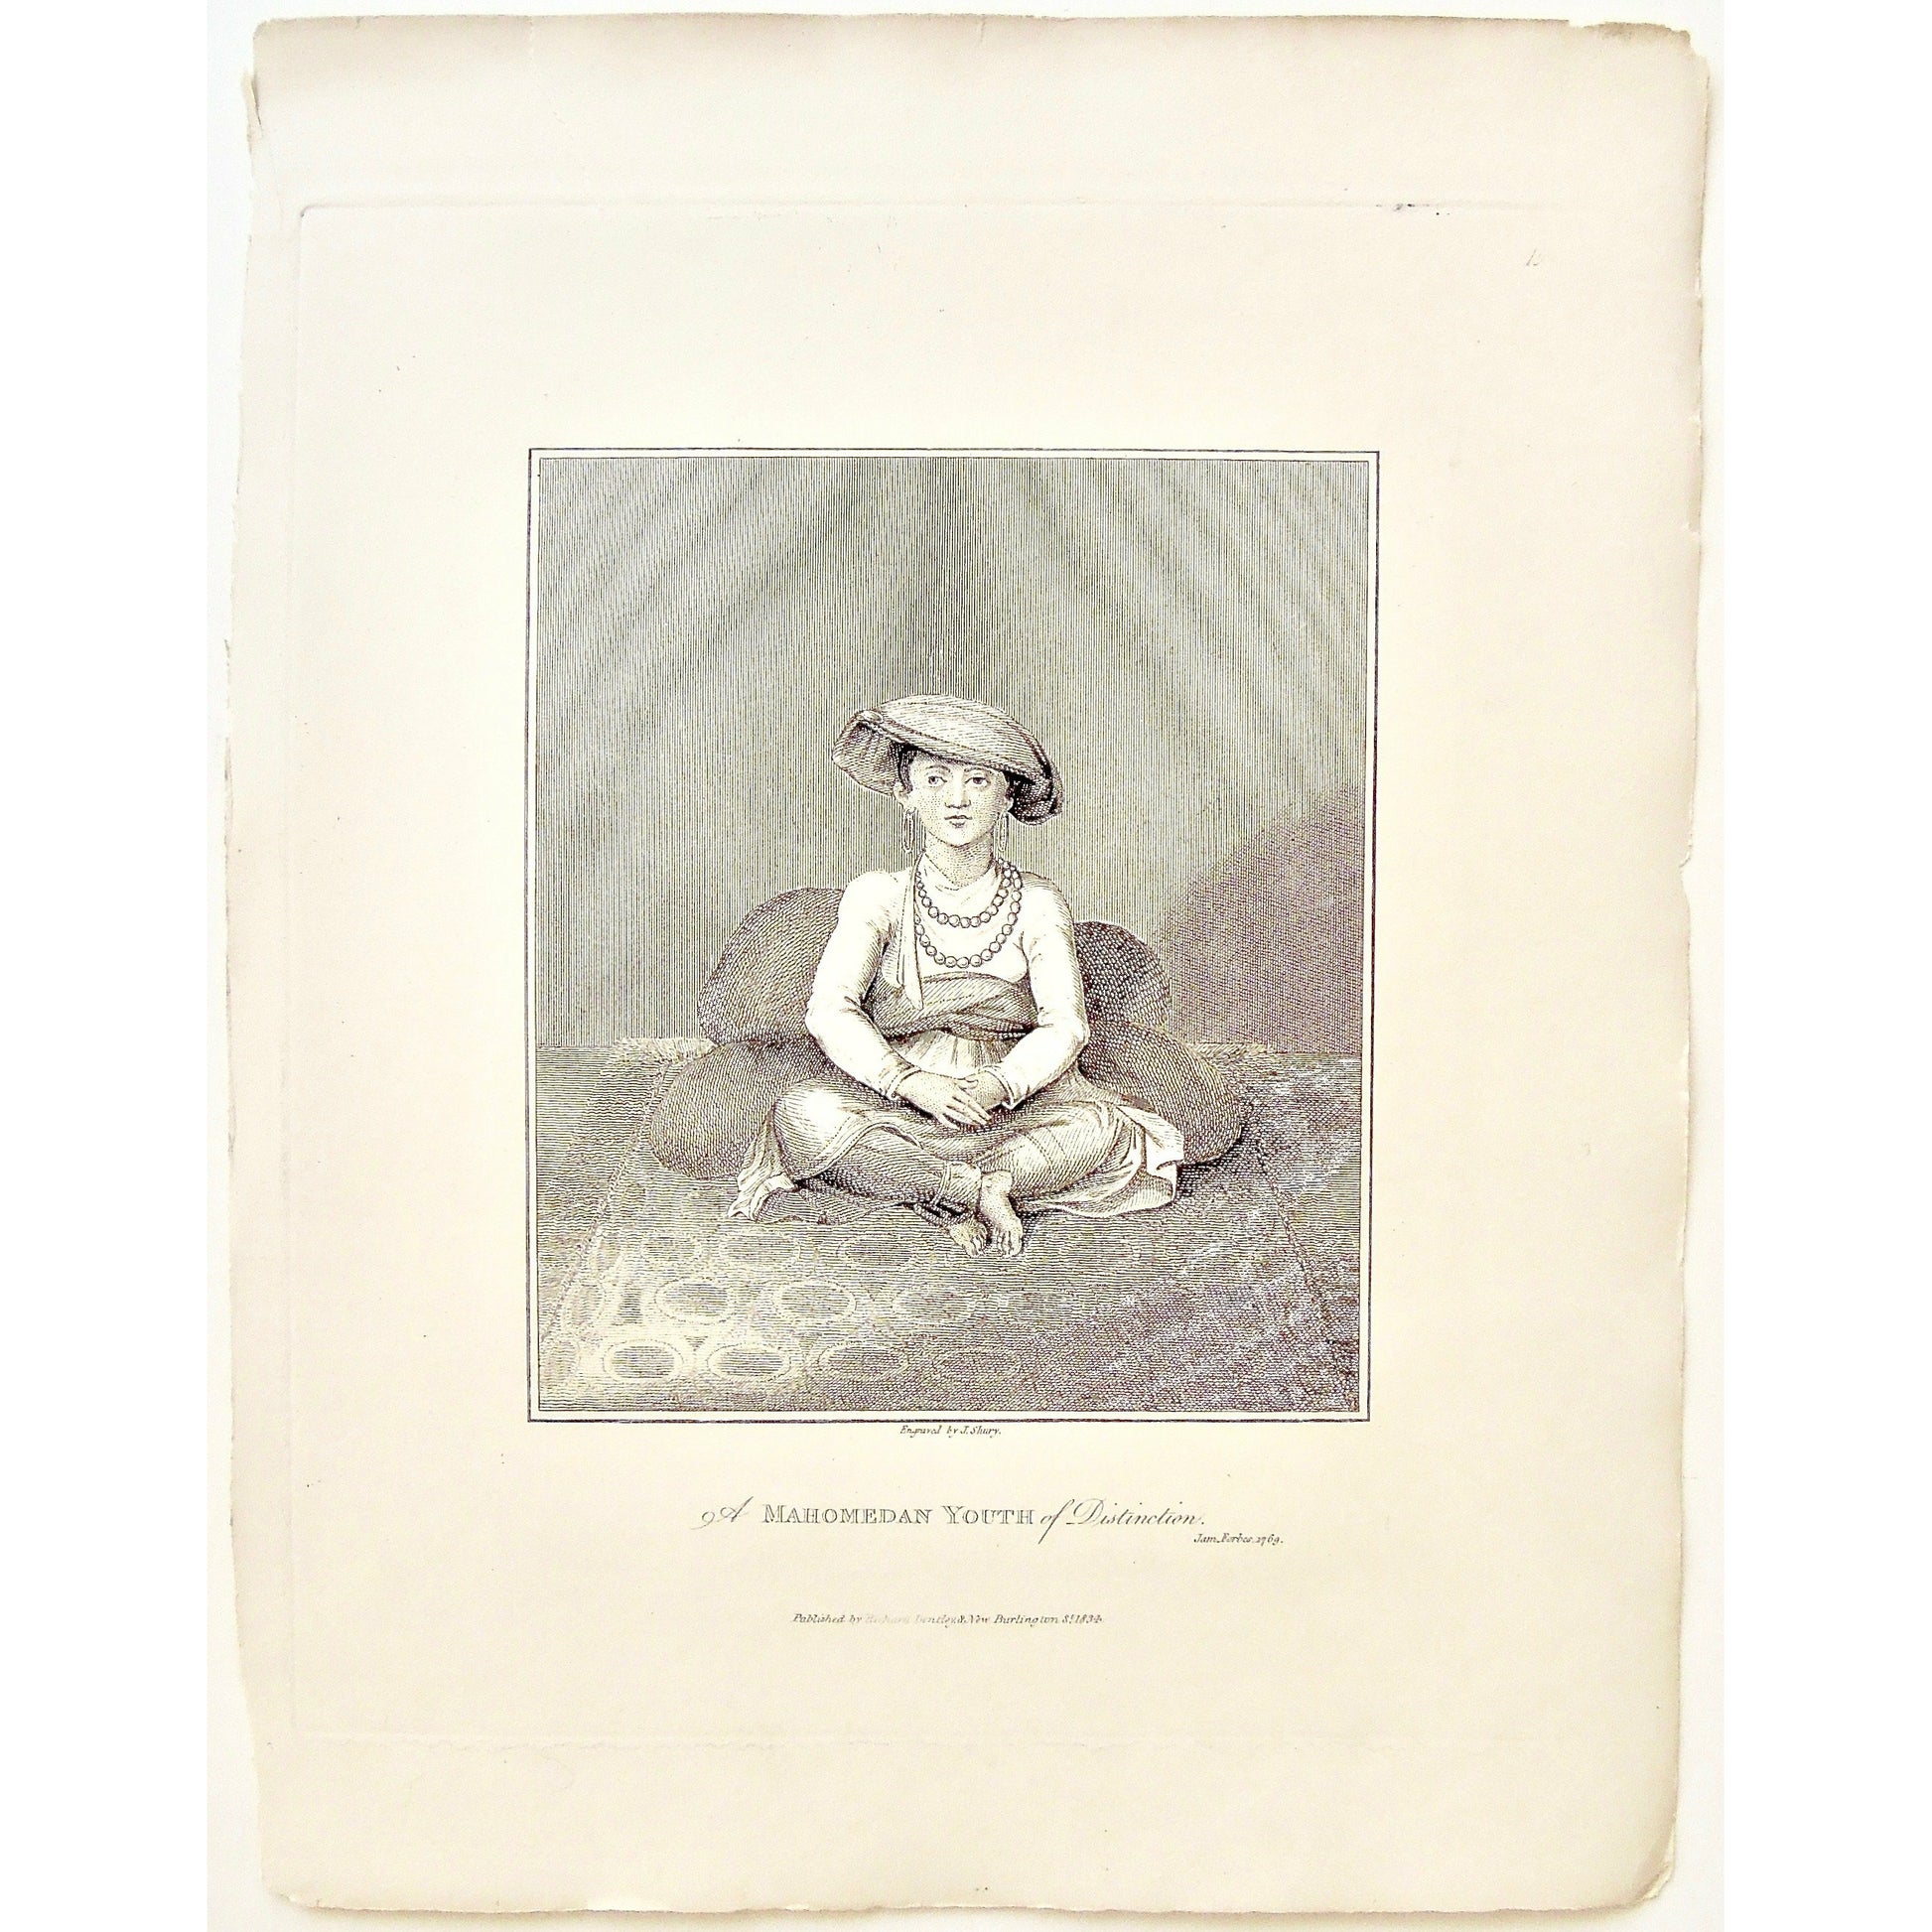 Mahomedan, Mahomedan Youth of distinction, Mahomedan Youth, Mahomedan of distinction, of distinction, Youth, Hat, Jewelry, necklaces, earrings, seated, portrait, India, Indian girl, Indian, James Forbes, Forbes, Eliza Rosée, Countess De Montalembert, Oriental Memoirs, Narrative of Seventeen Years Residence in India, Bentley, 8 New Burlington Street, London, Shury, Nichols & Son, 25 Parliament Street, 1769, 1834, Steel engraving, Antique Print, Antique, Prints, Vintage Prints, Vintage, Collector, Collect